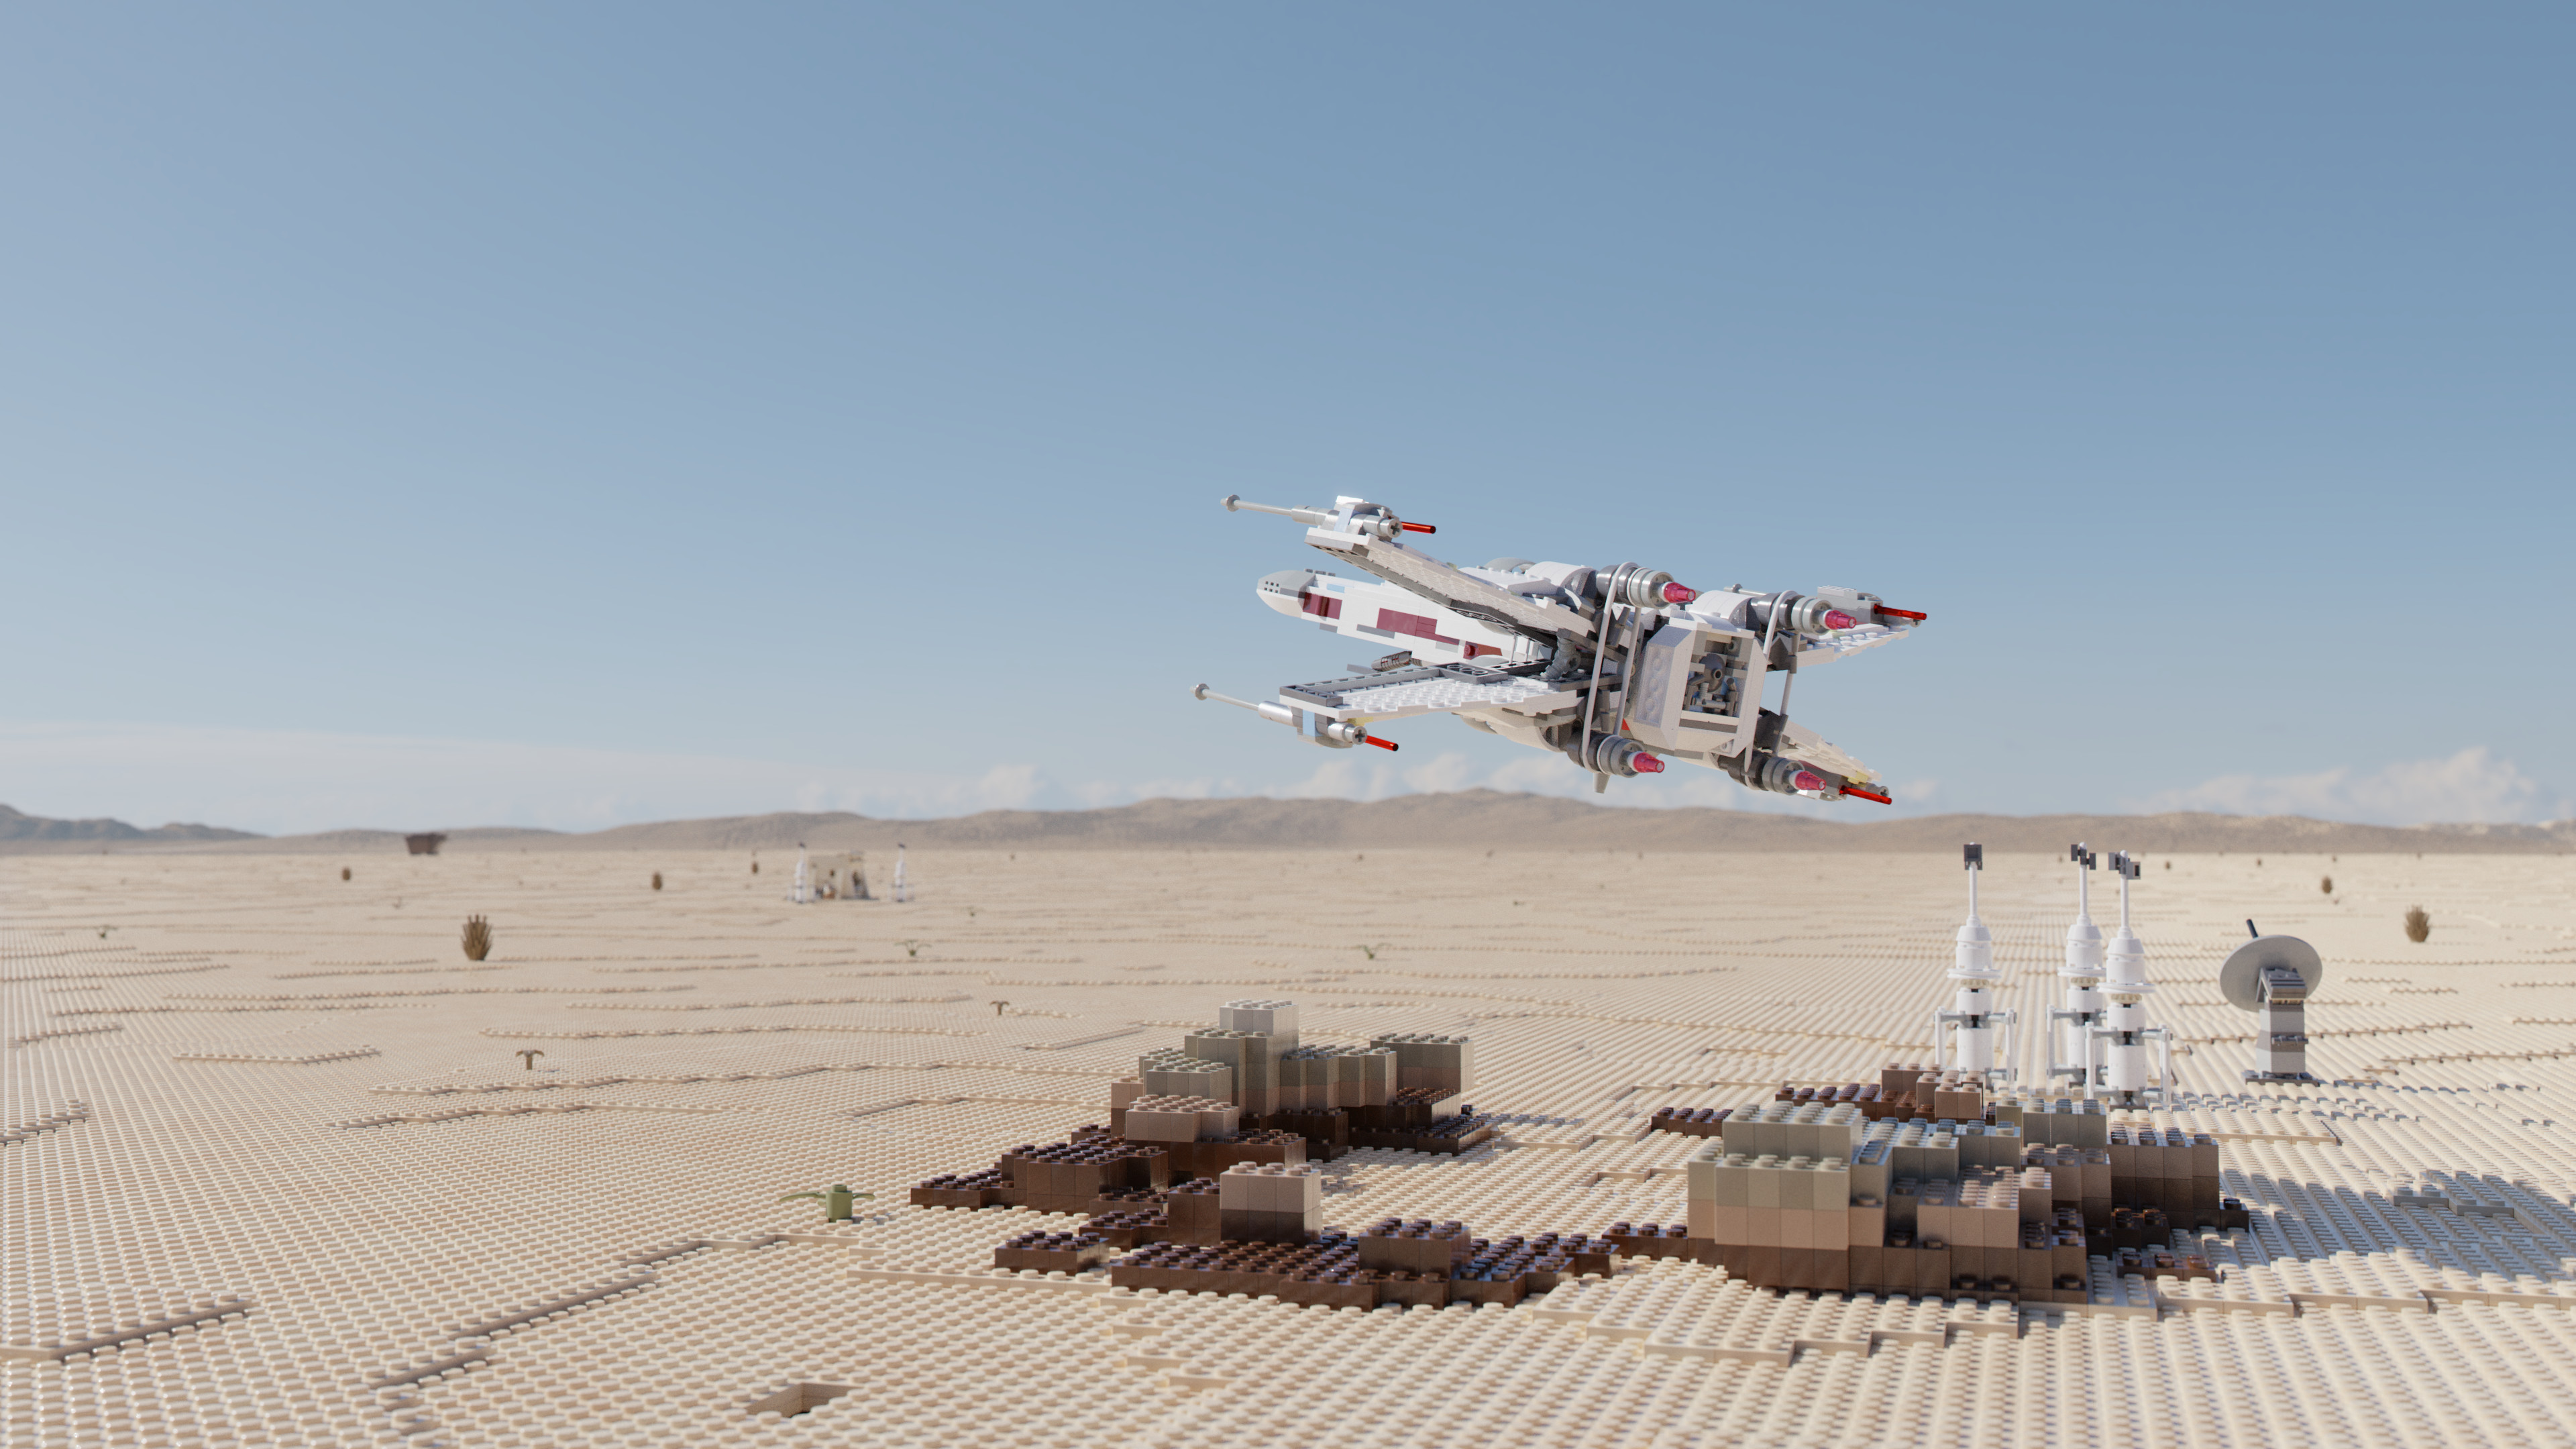 Image of a Lego Star Wars X-Wing taking off from a desert.